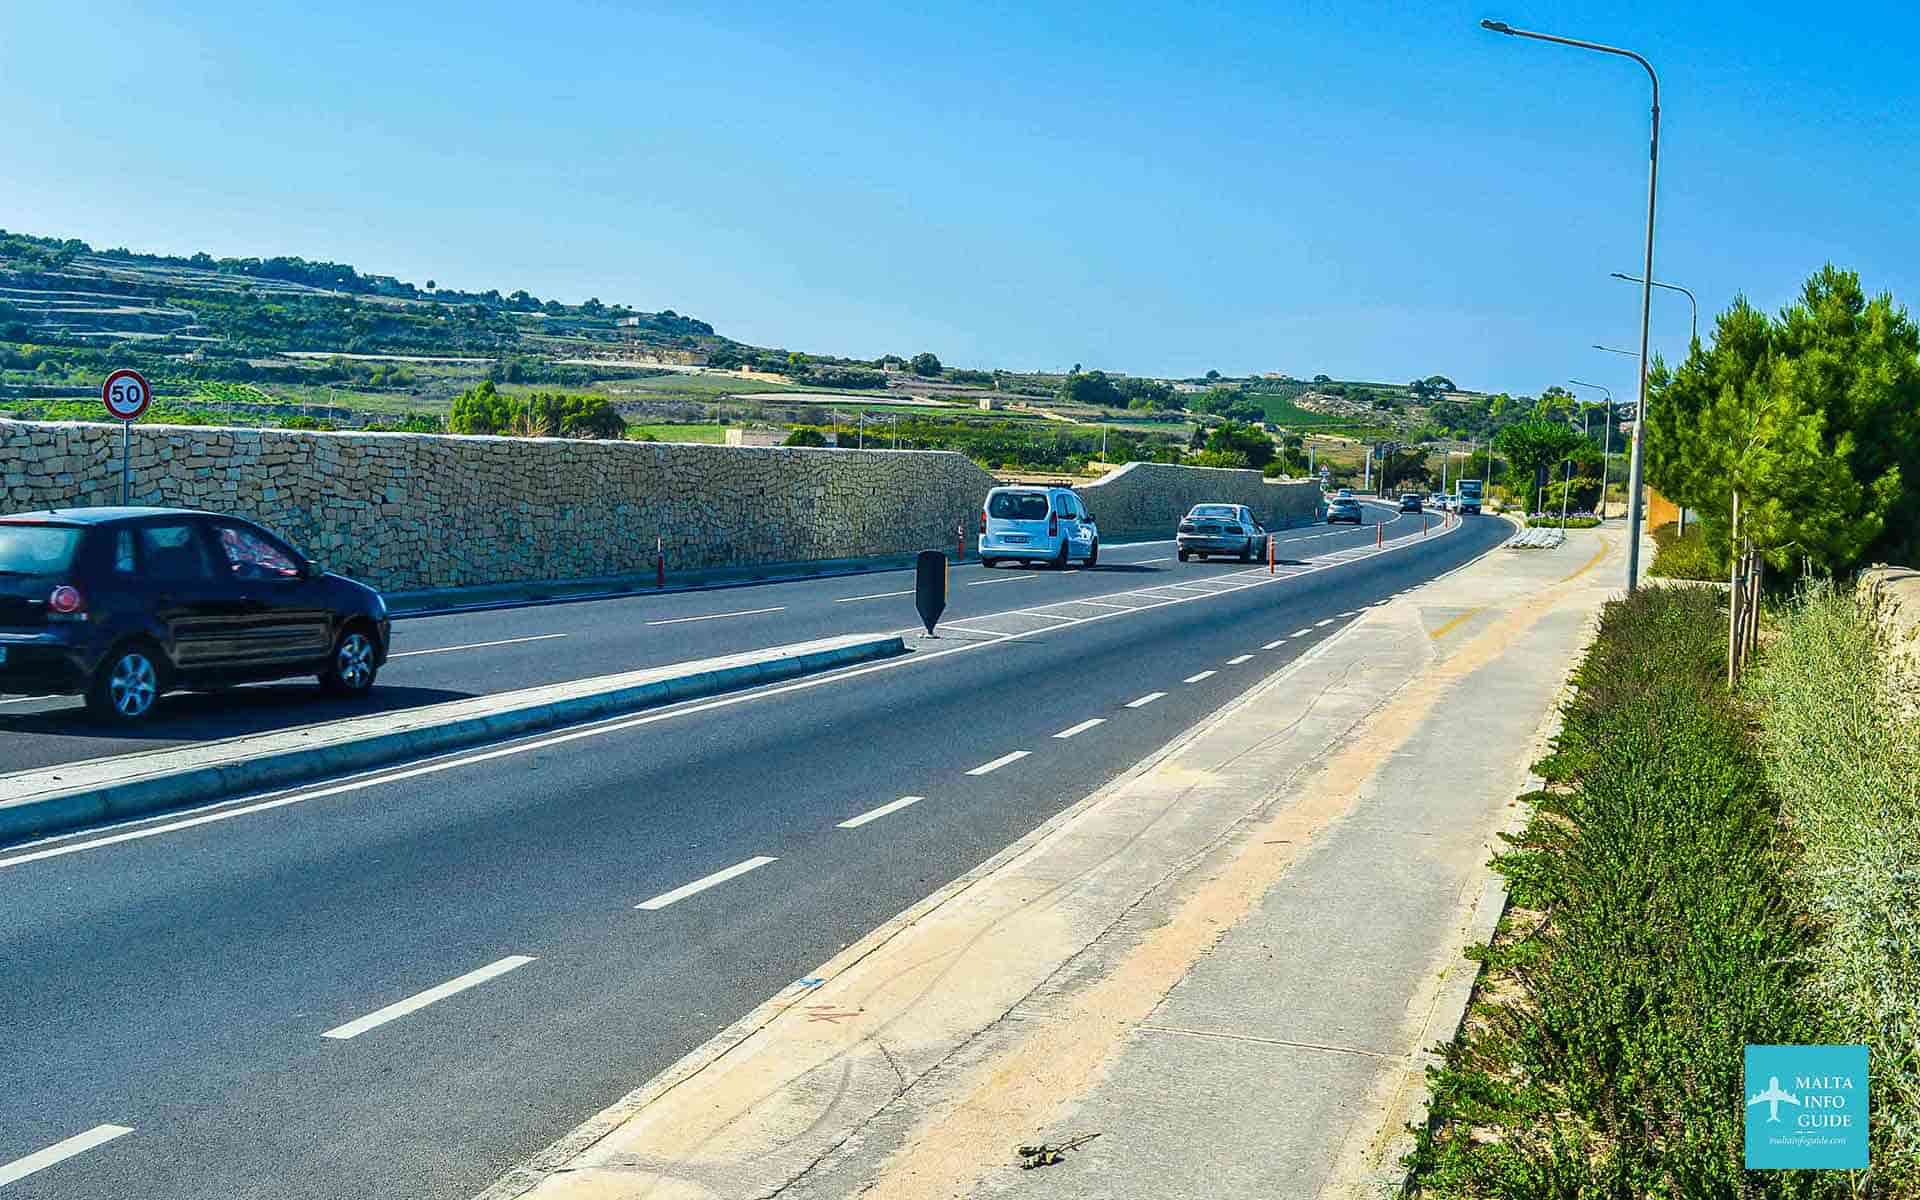 Cars driving towards Mosta or other villages.